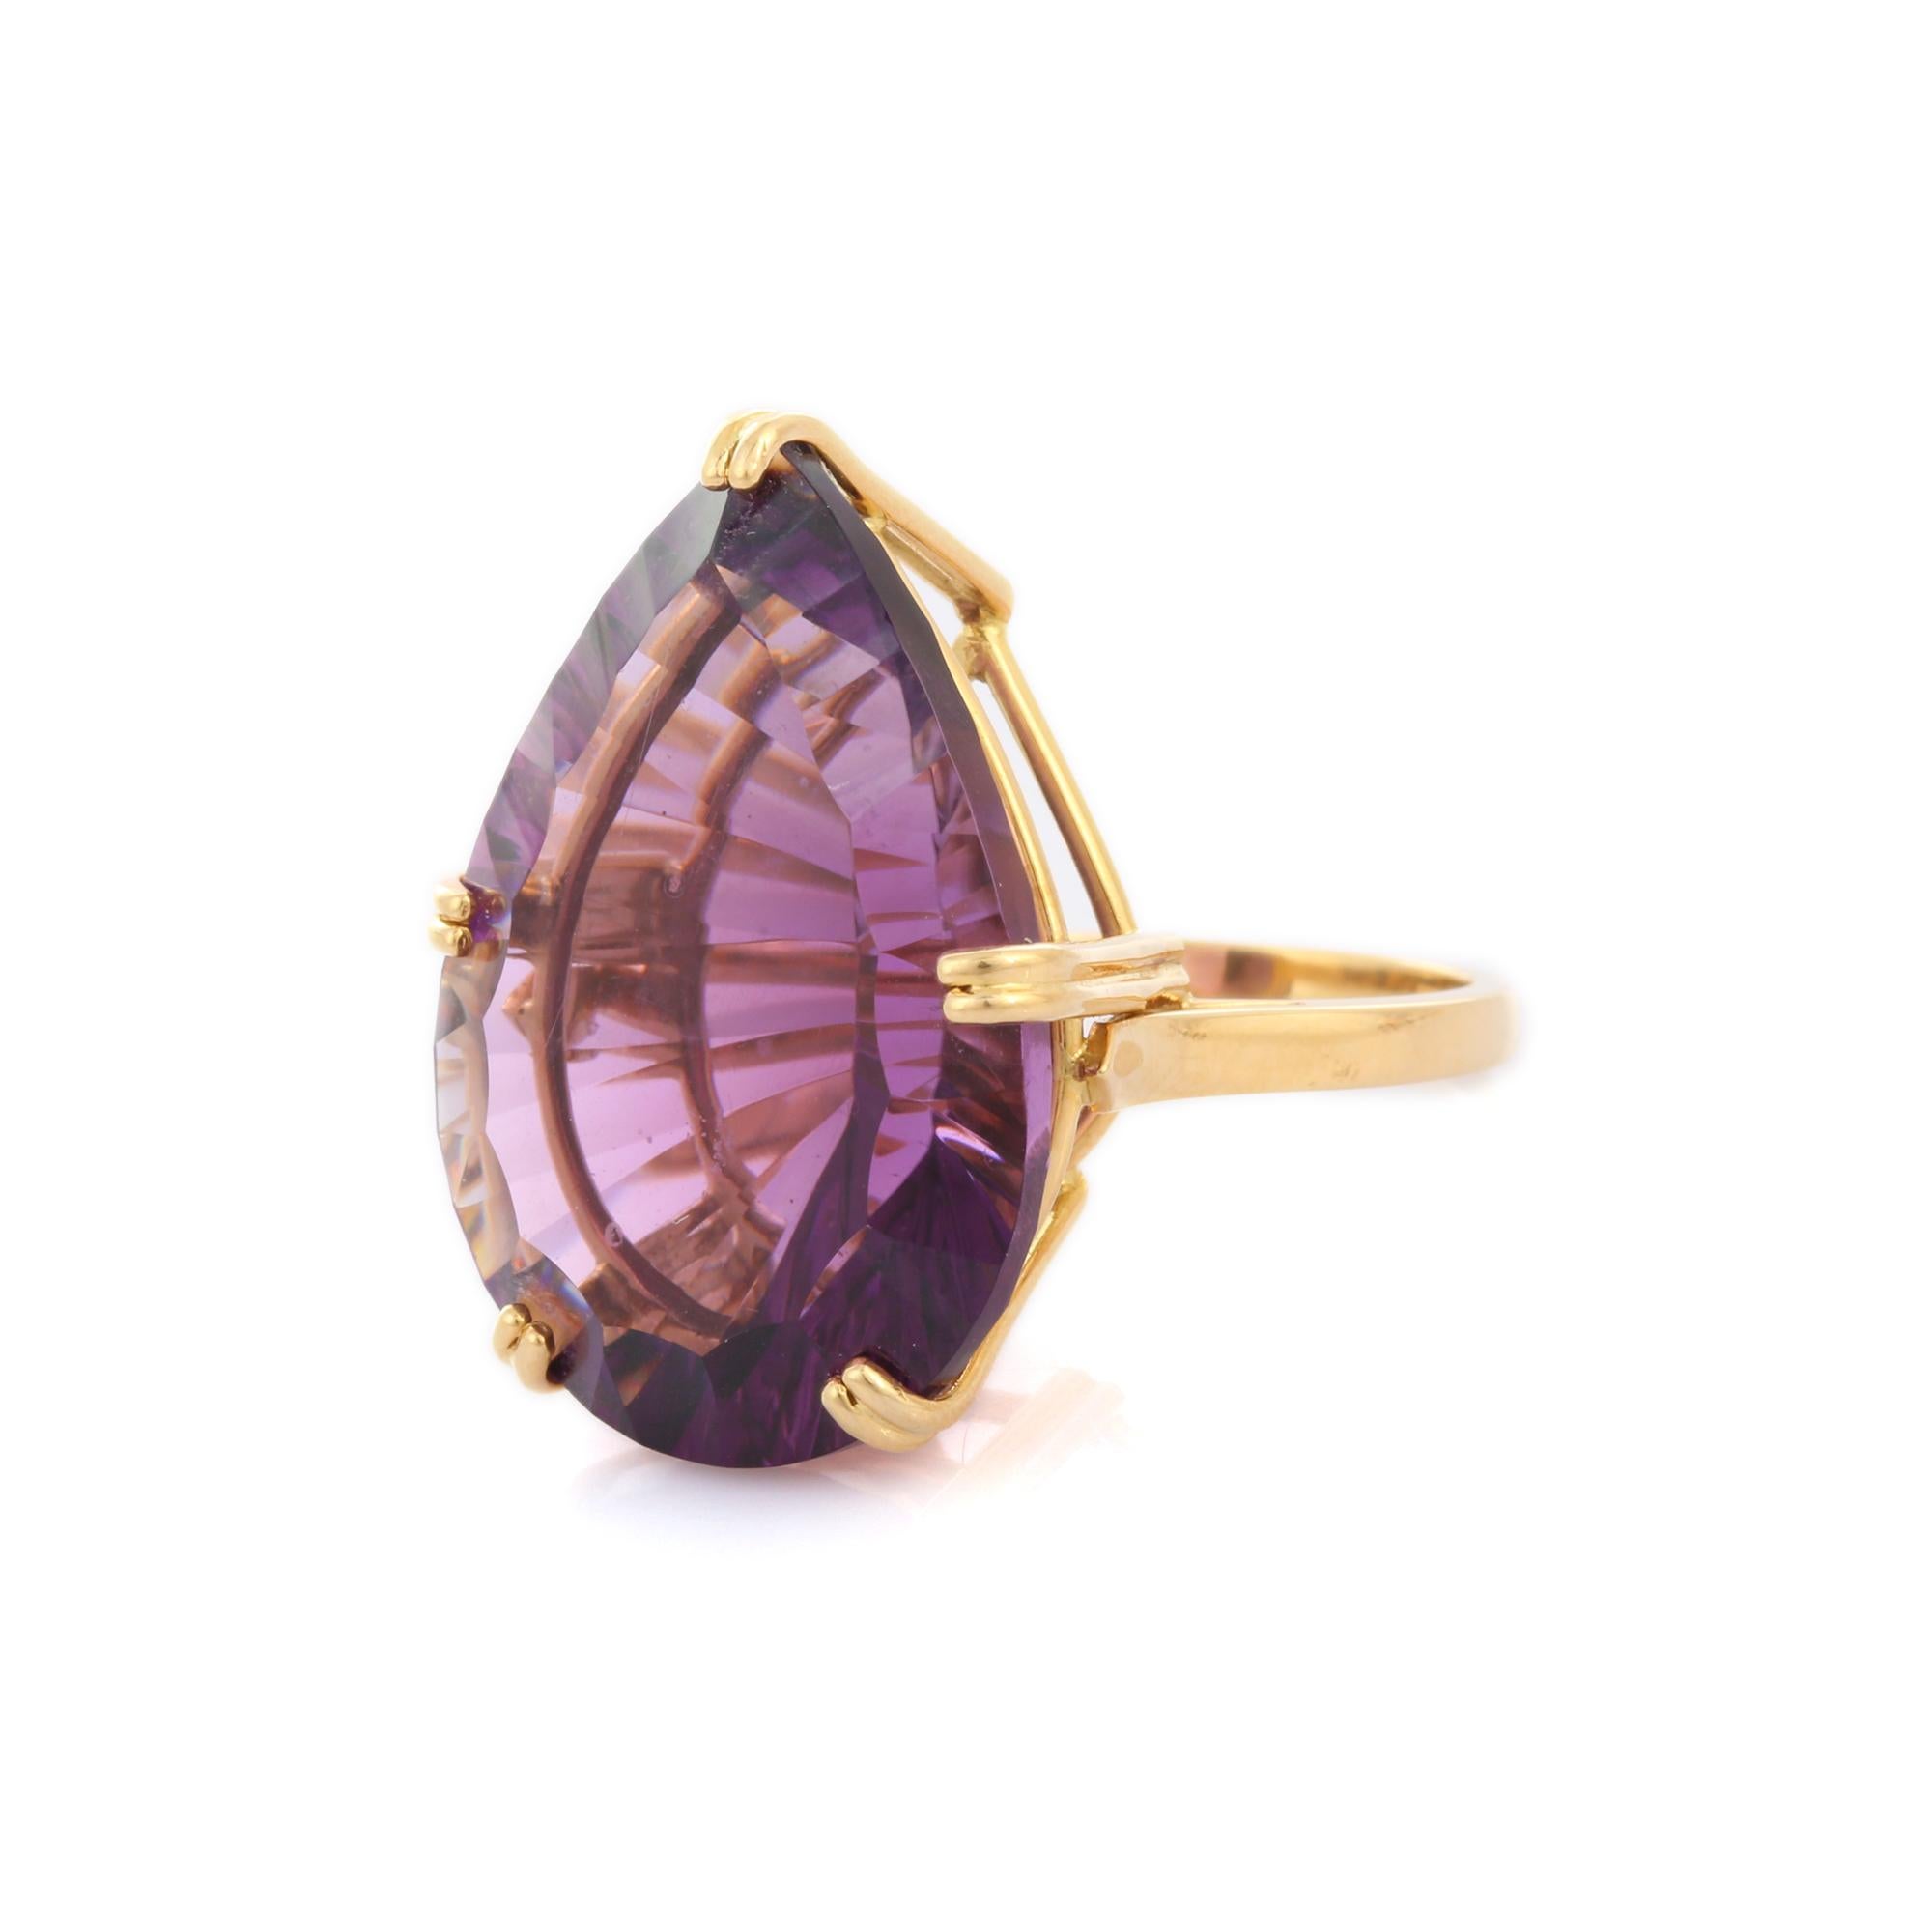 For Sale:  18K Yellow Gold 34.23 Carat Amethyst Cocktail Ring 5